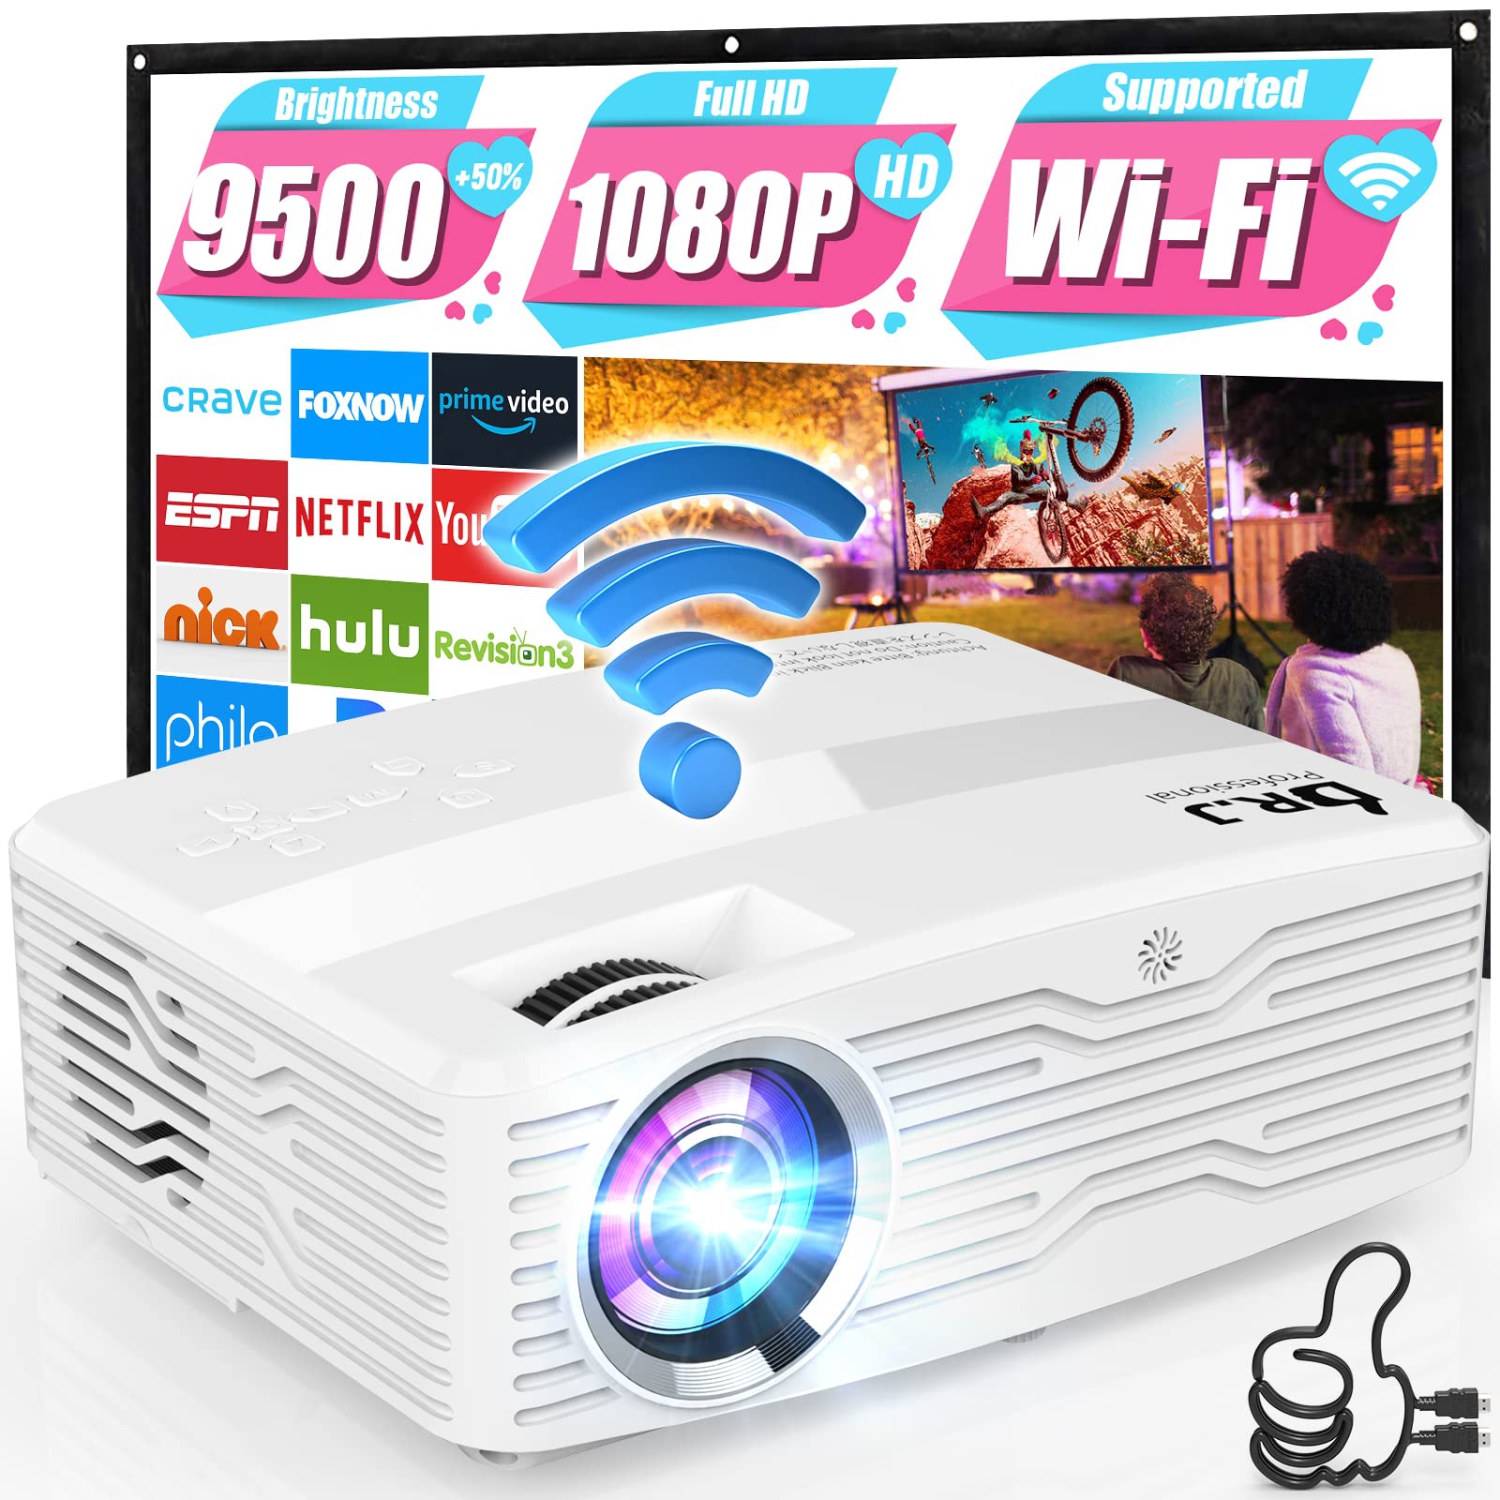 1080P 5G WiFi Projector [with 120" Projector Screen], 9500 Lumens 300 Display Outdoor Projector, 350 ANSI, 4K Supported, Home Projector for iOS/Android/TV Stick